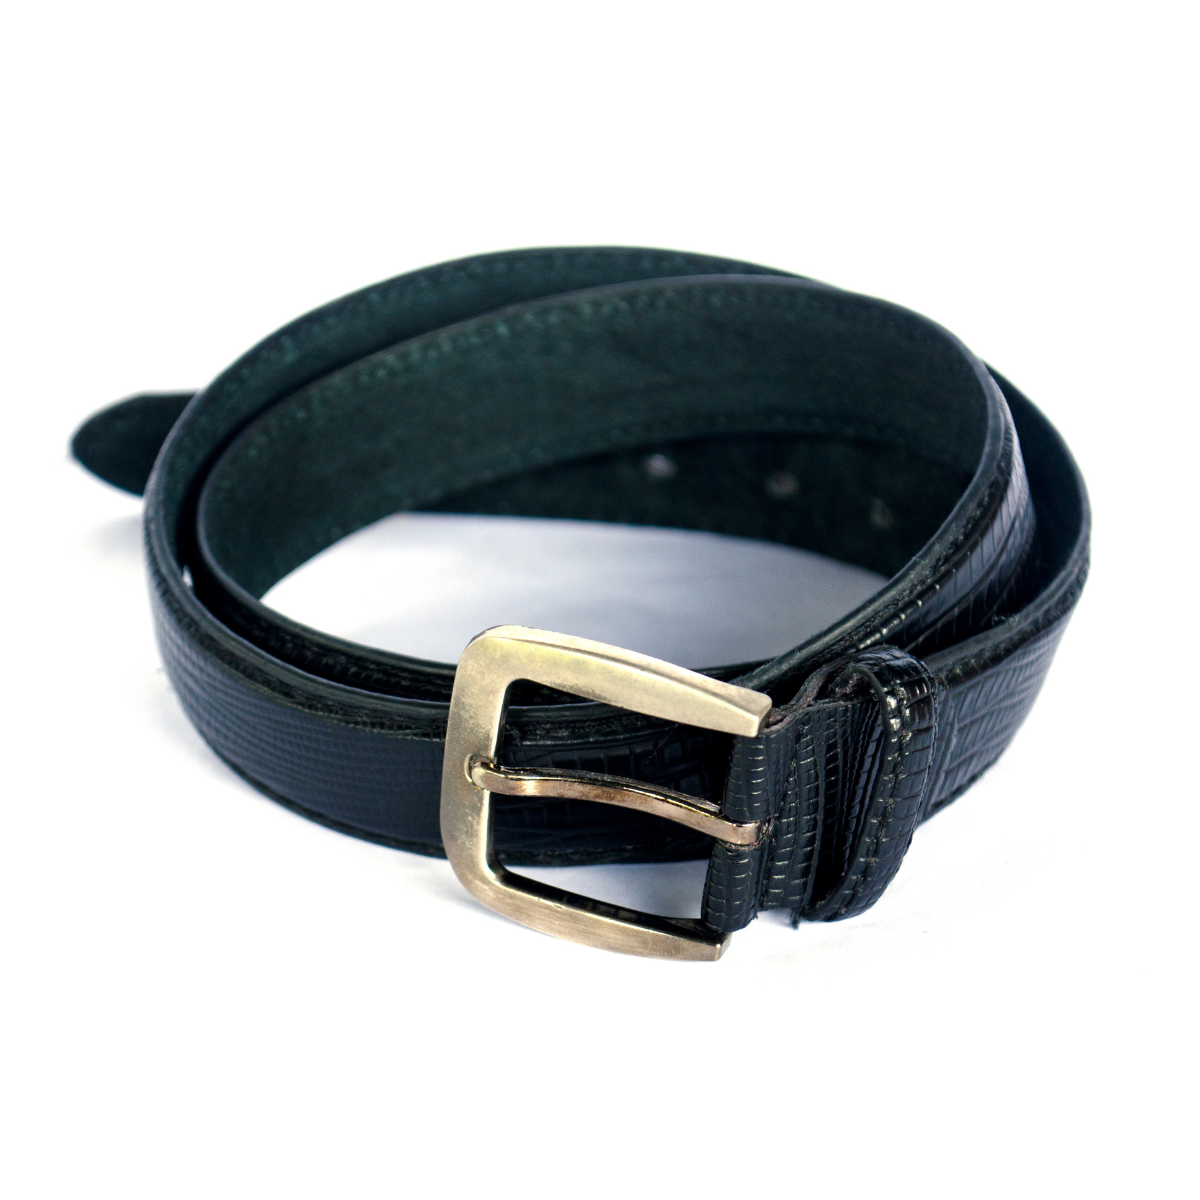 9. Timeless Elegance: Classic Leather Belt - The Perfect 10 Year Anniversary Gift for Him